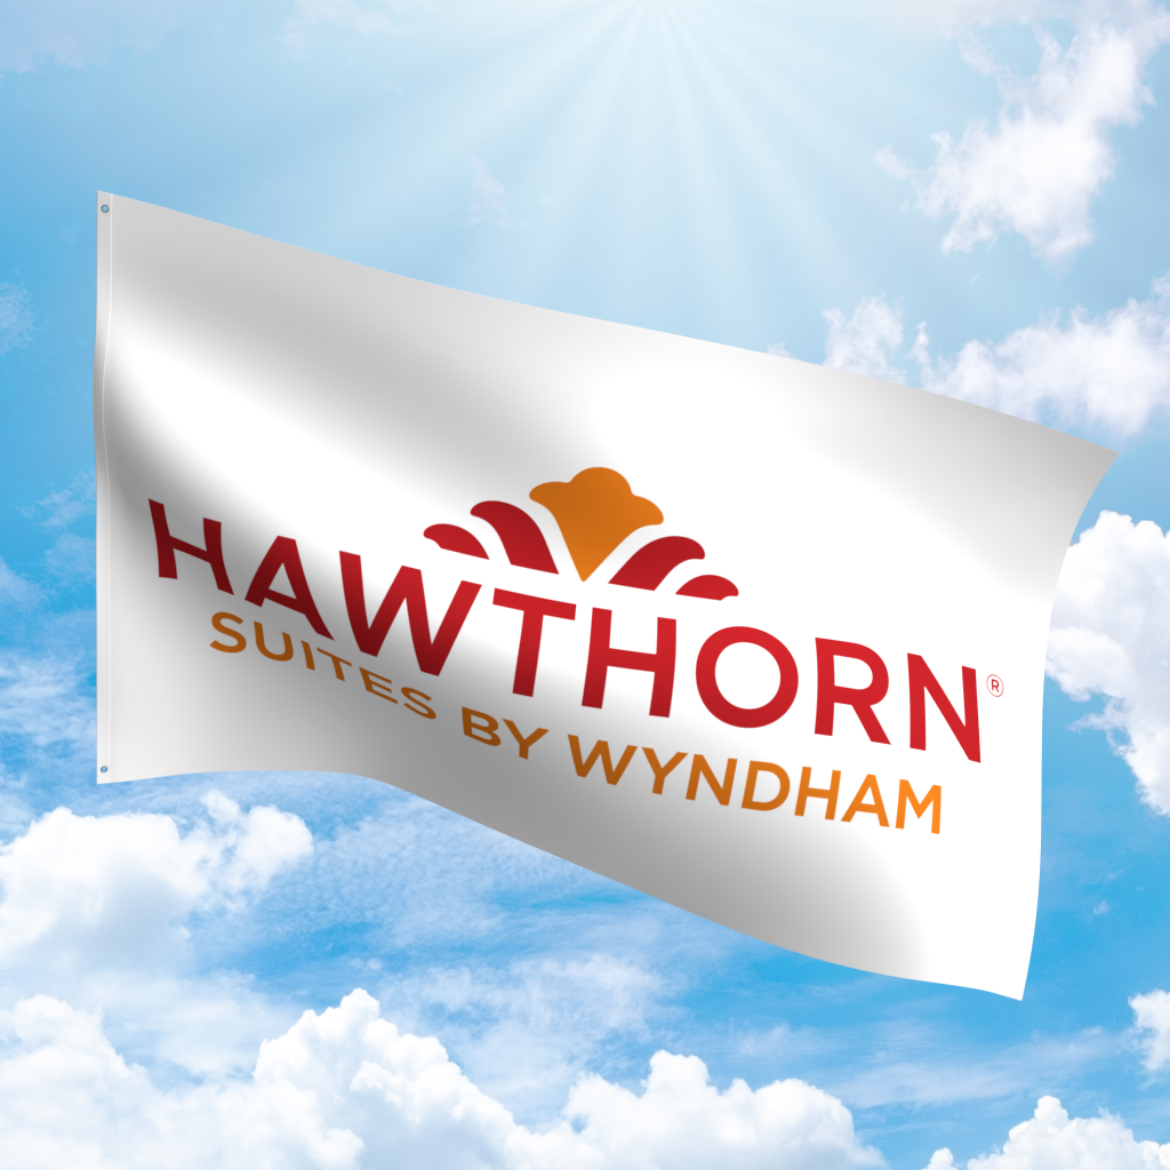 Picture of Hawthorn Suites Flag